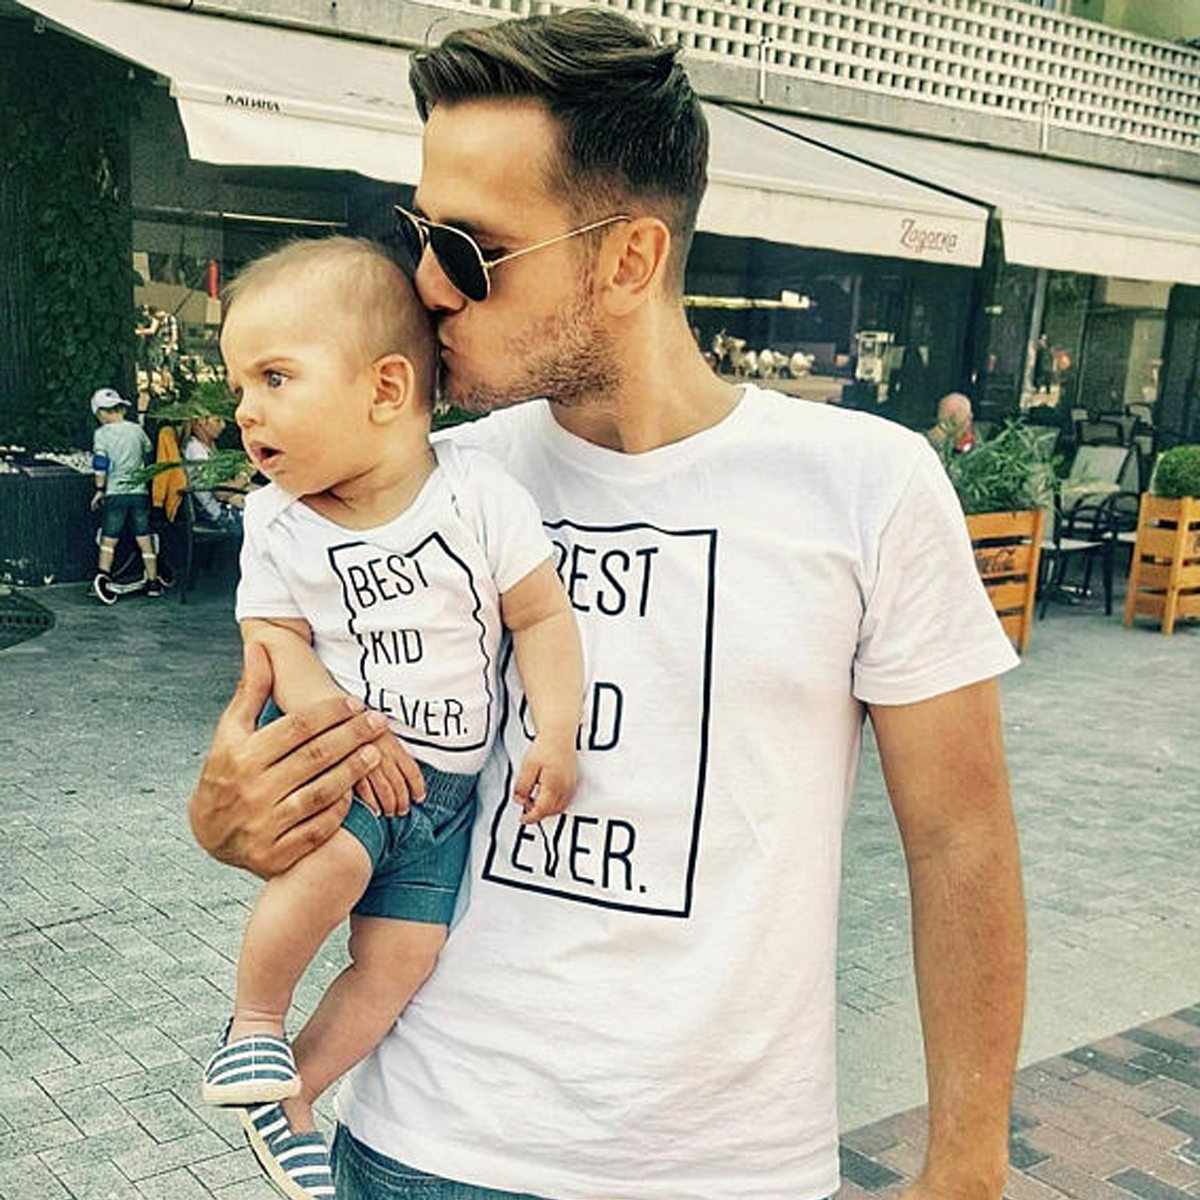 Best Dad Ever / Best Kid Ever Matching White T-Shirts